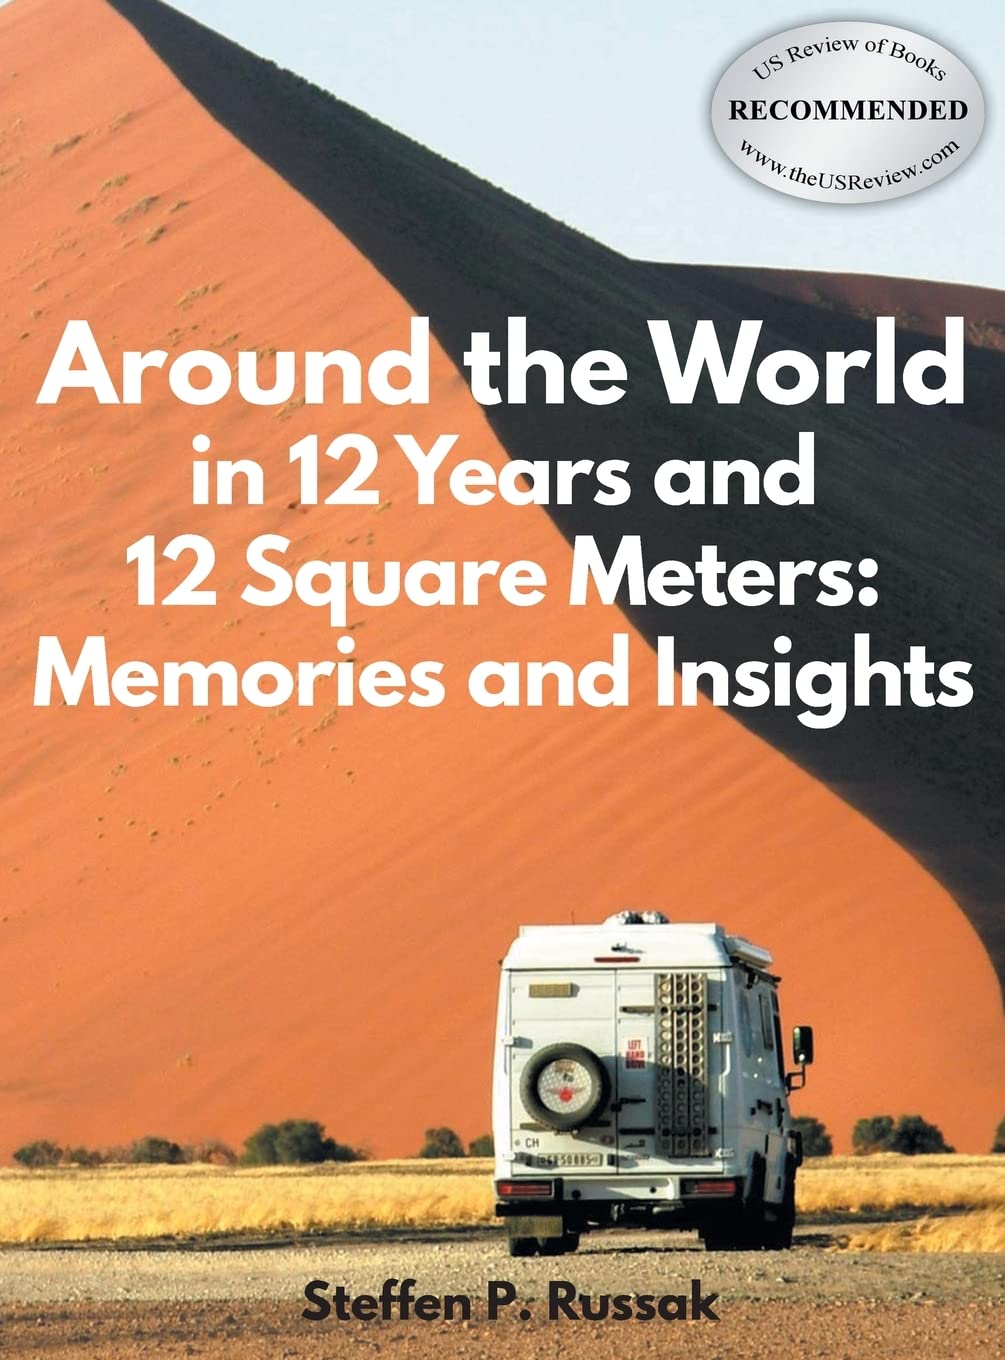 Steffen P. Russak releases a new book: 'Around the World in 12 Years and 12 Square Meters: Memories and Insights', marketed by Author’s Tranquility Press.